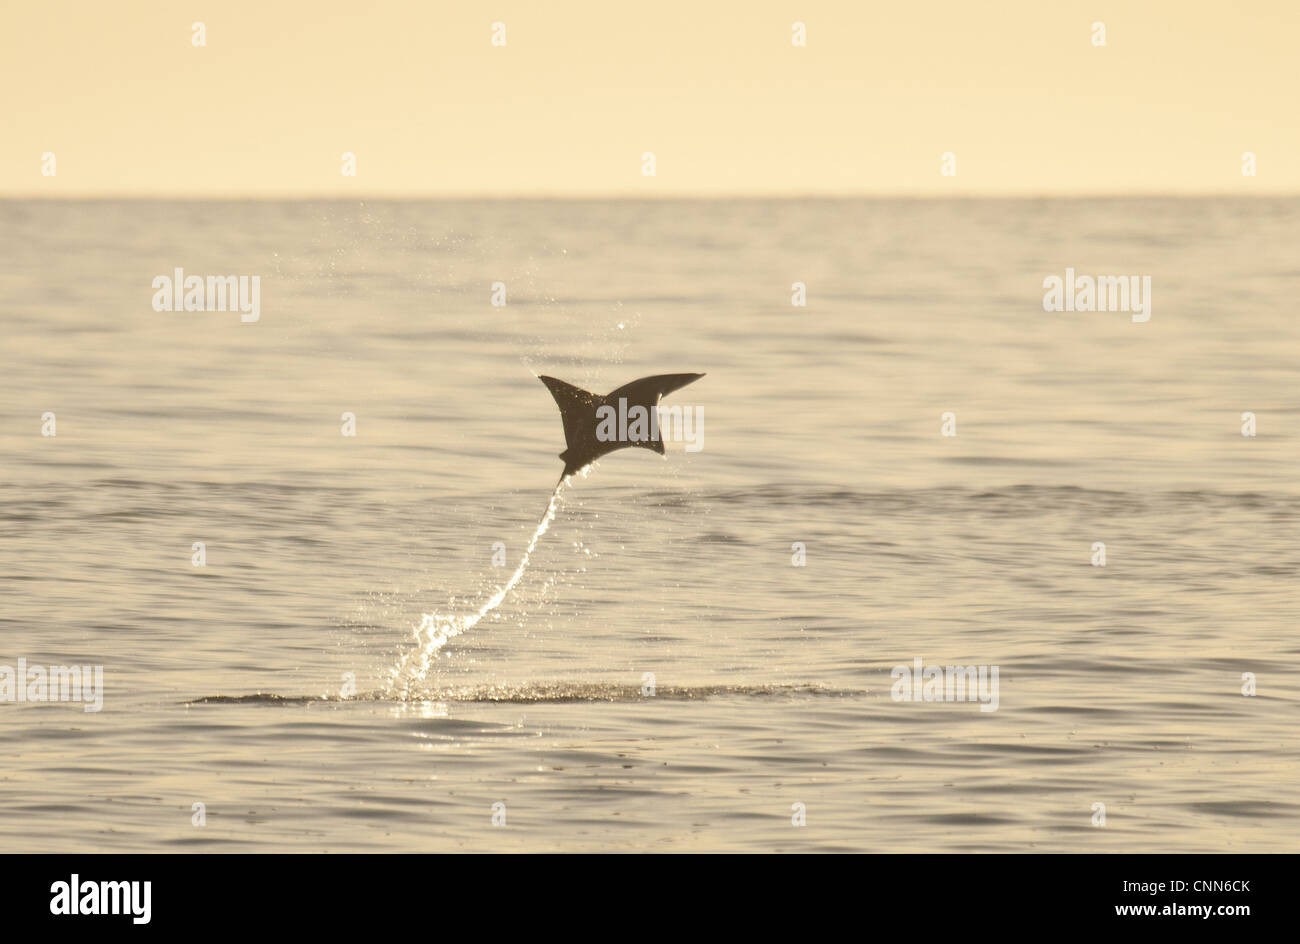 Mobula Ray (Mobula sp.) adult, leaping from water at dusk, Sea of Cortes, Los Barriles, Baja California Sur, Mexico, march Stock Photo